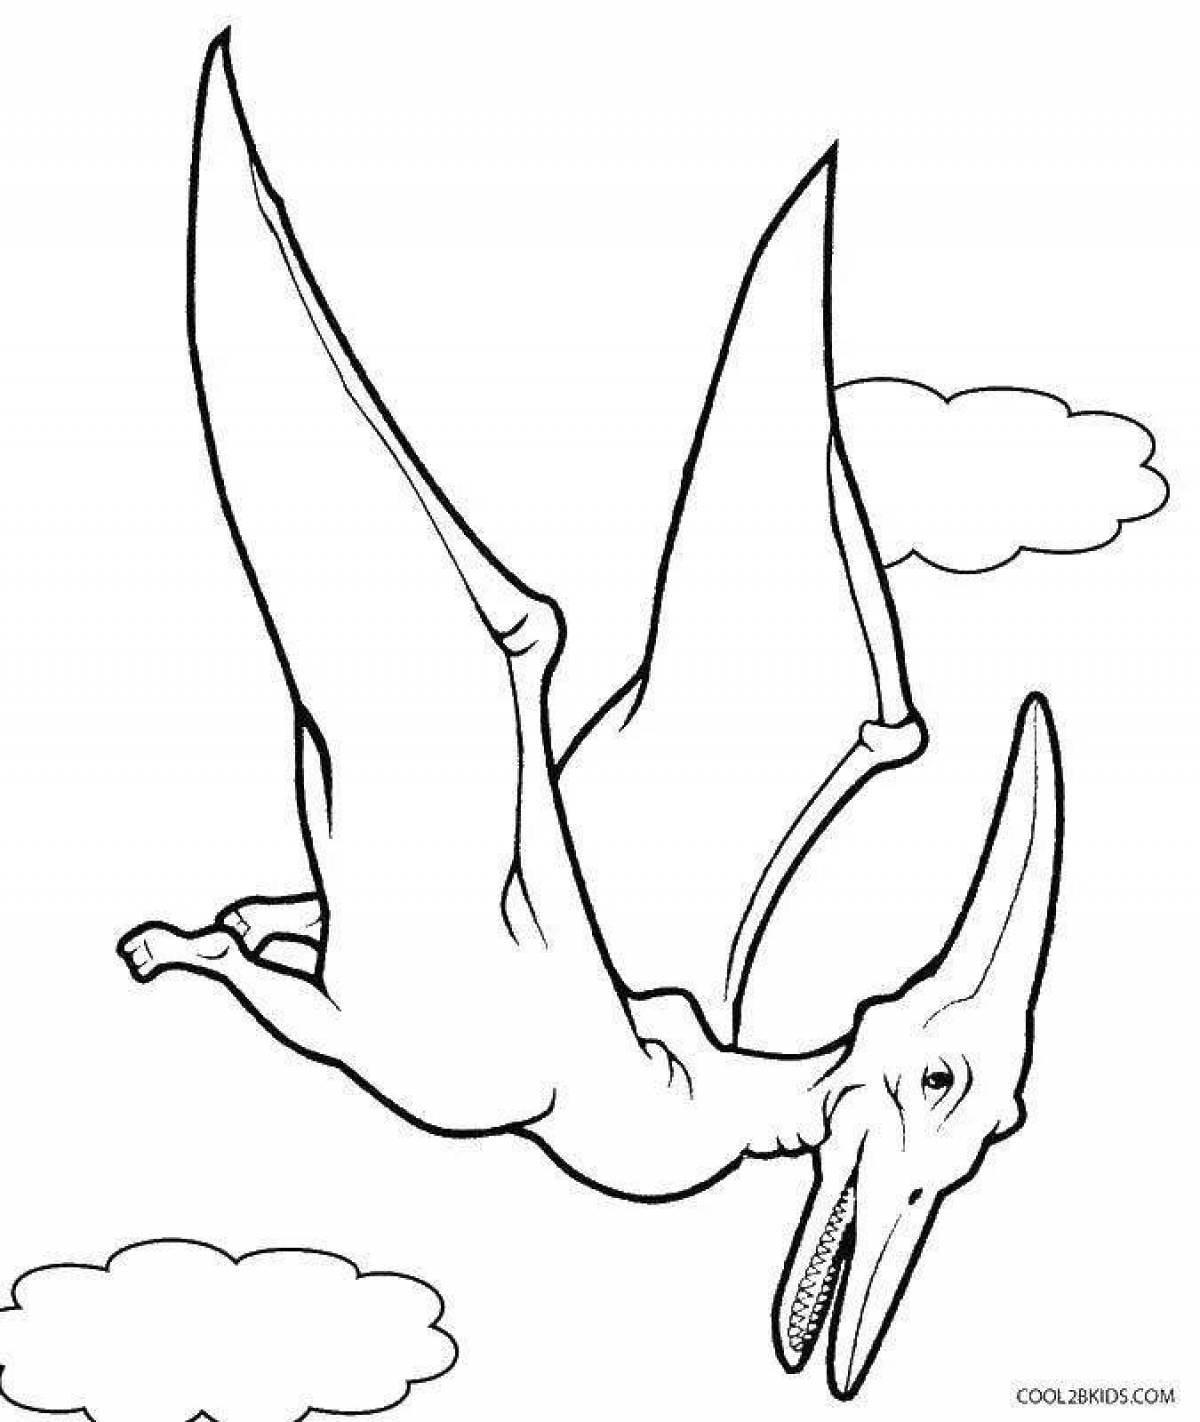 Coloring page dazzling flying dinosaur